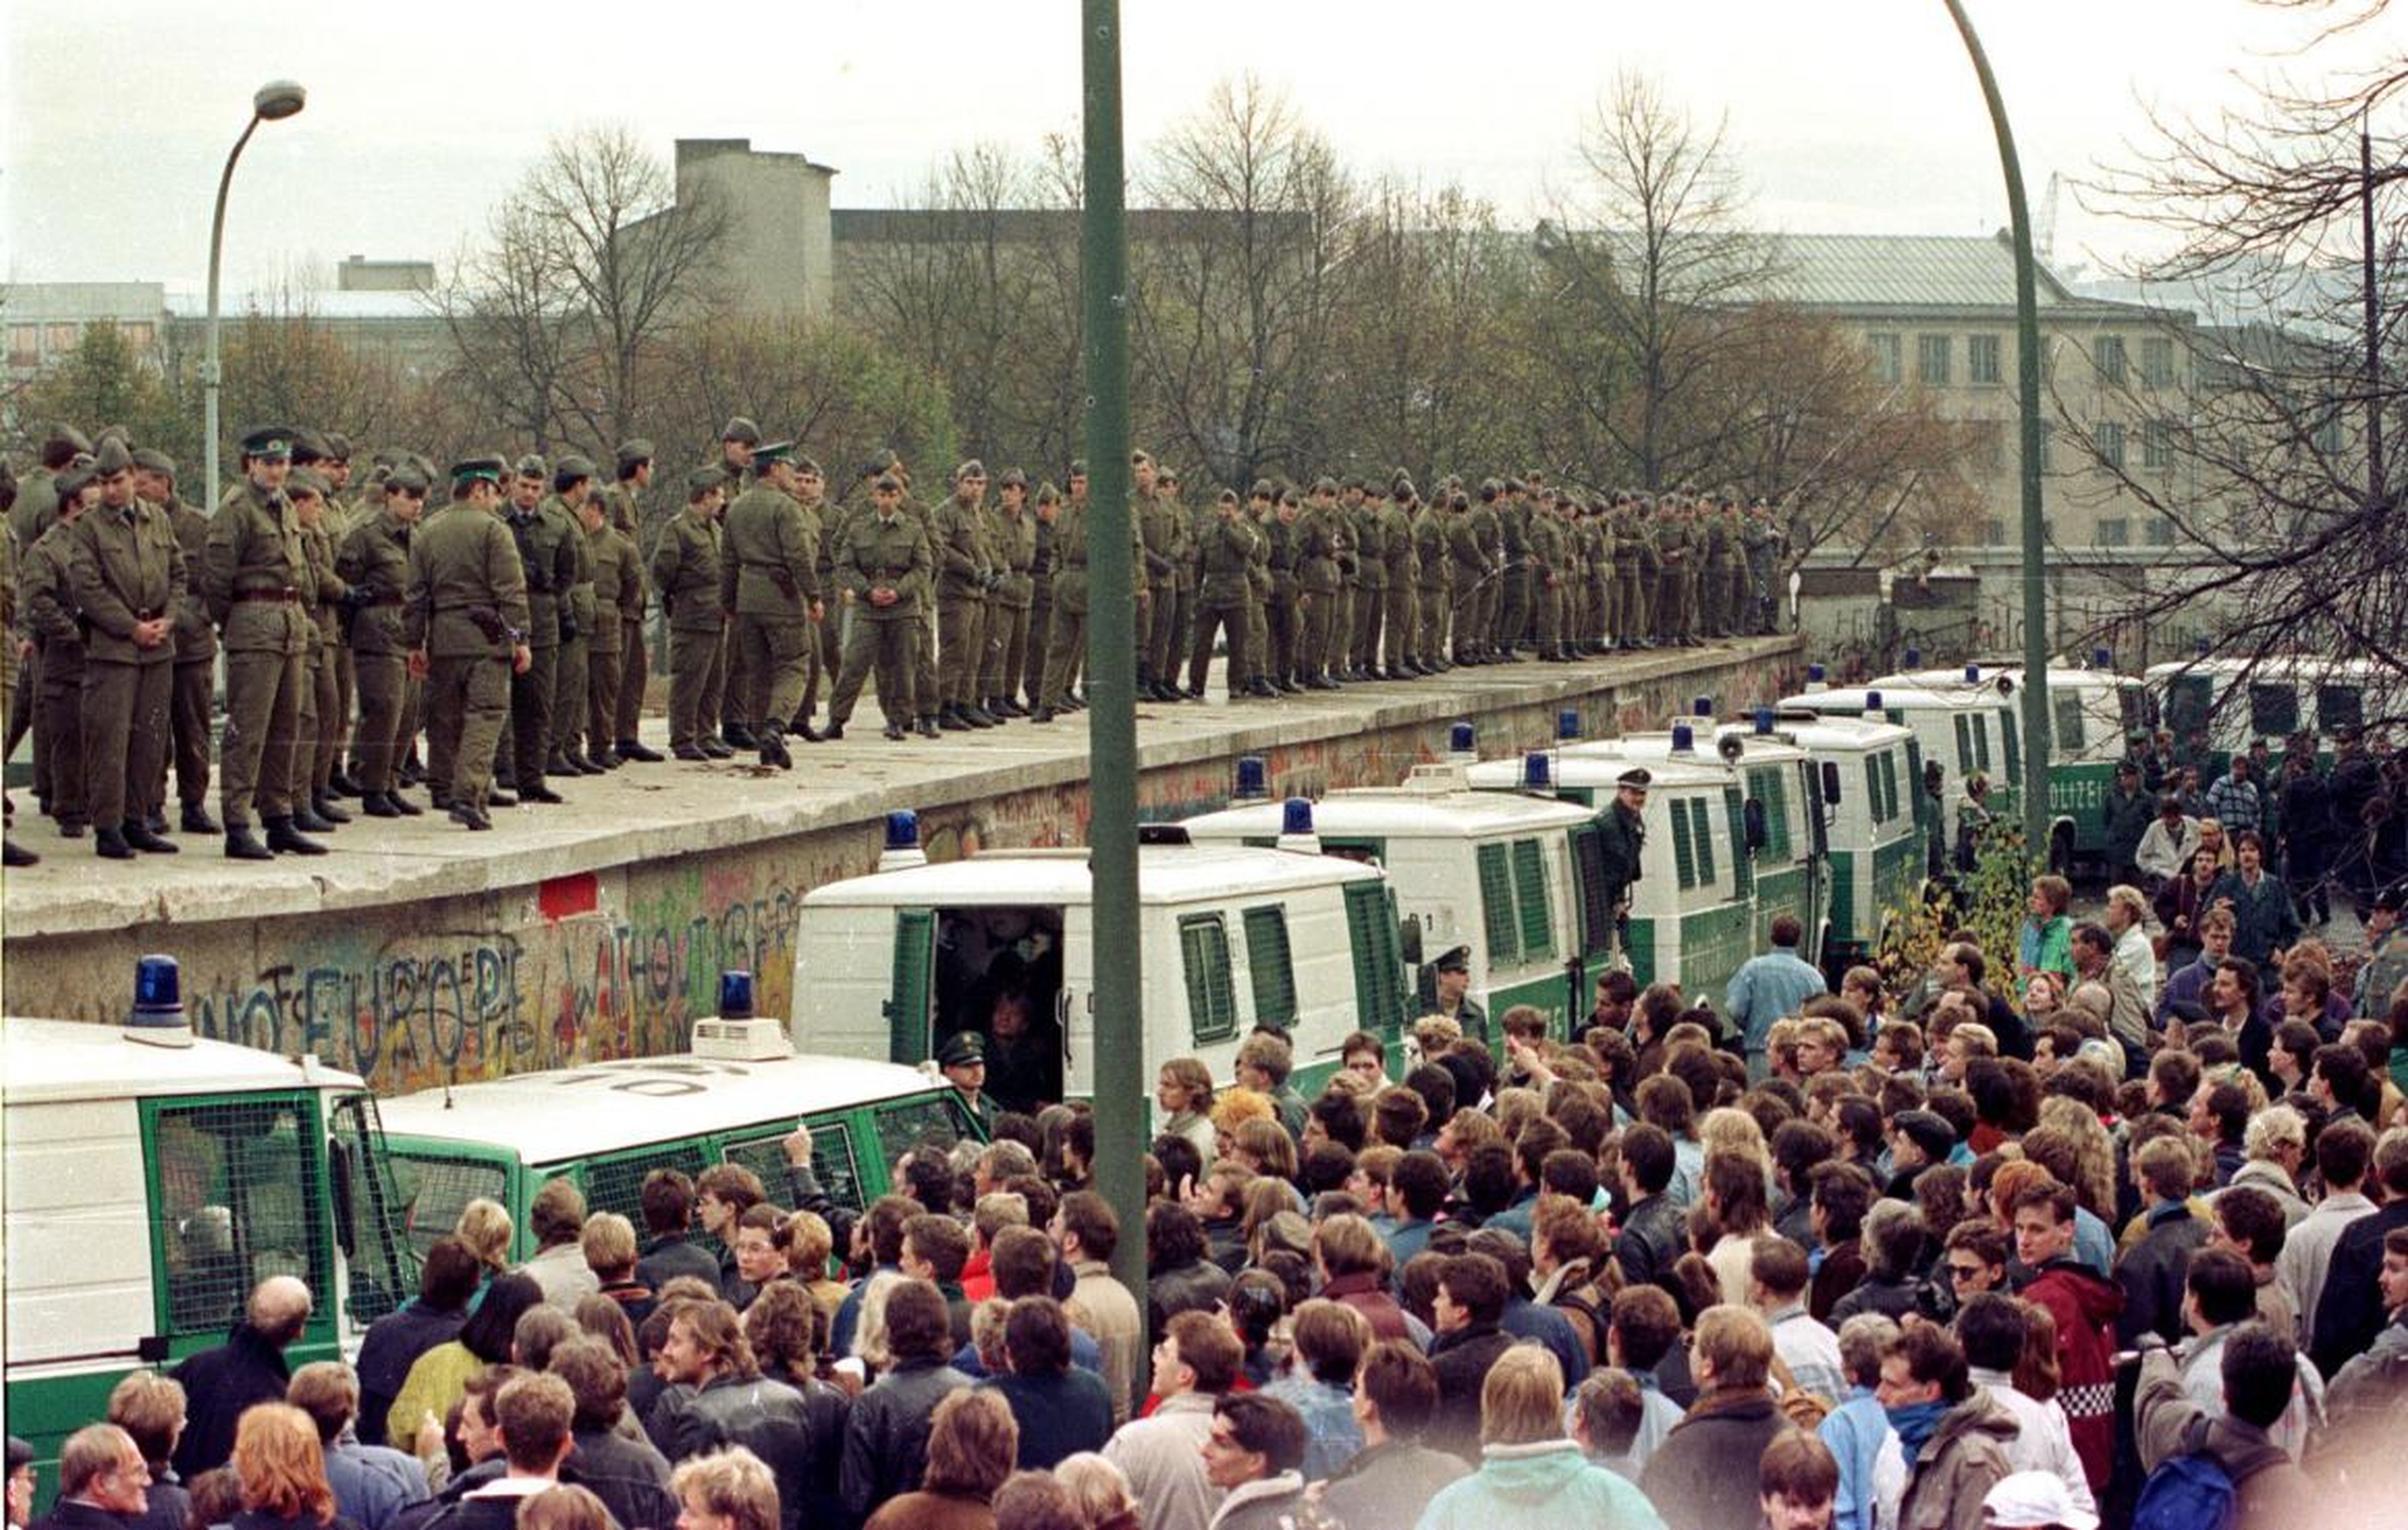 Looking out onto a sea of thousands, East Berlin border guards stood atop the Berlin Wall at the Brandenburg Gate November 11.